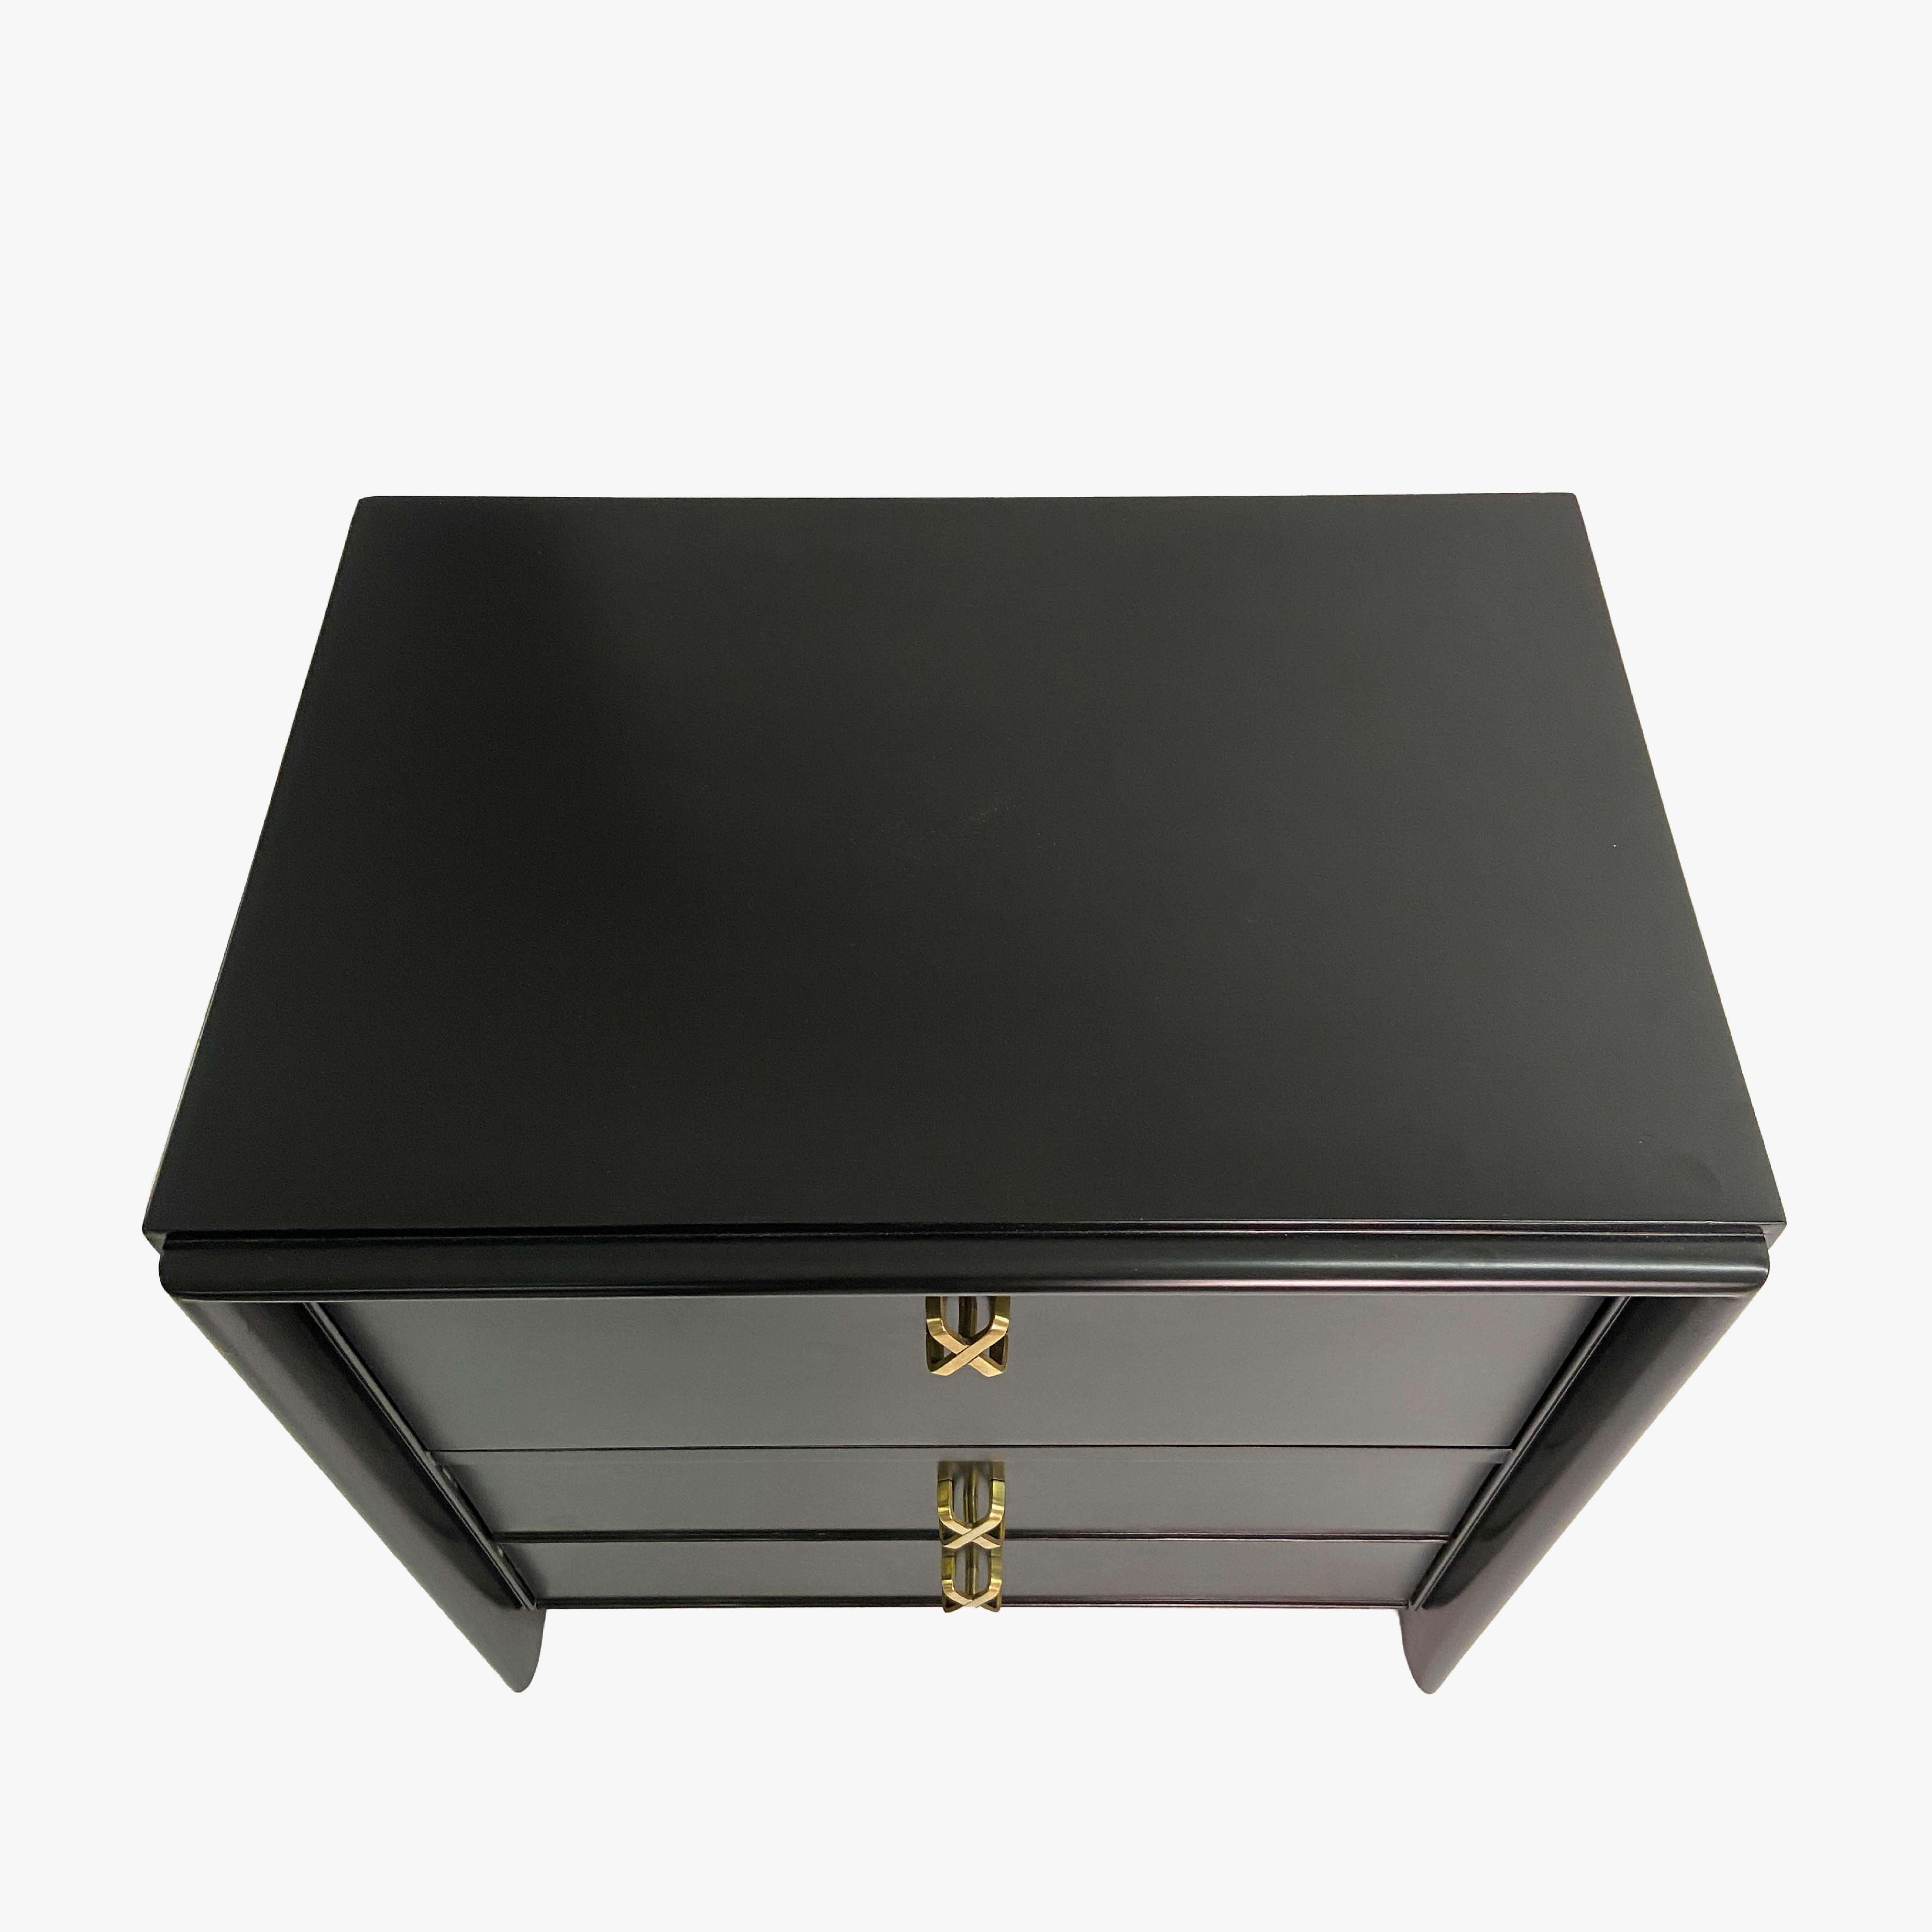 Ebonized Mid-Century Modern Paul Frankl Nightstands Lacquered in Ebony, Pair For Sale